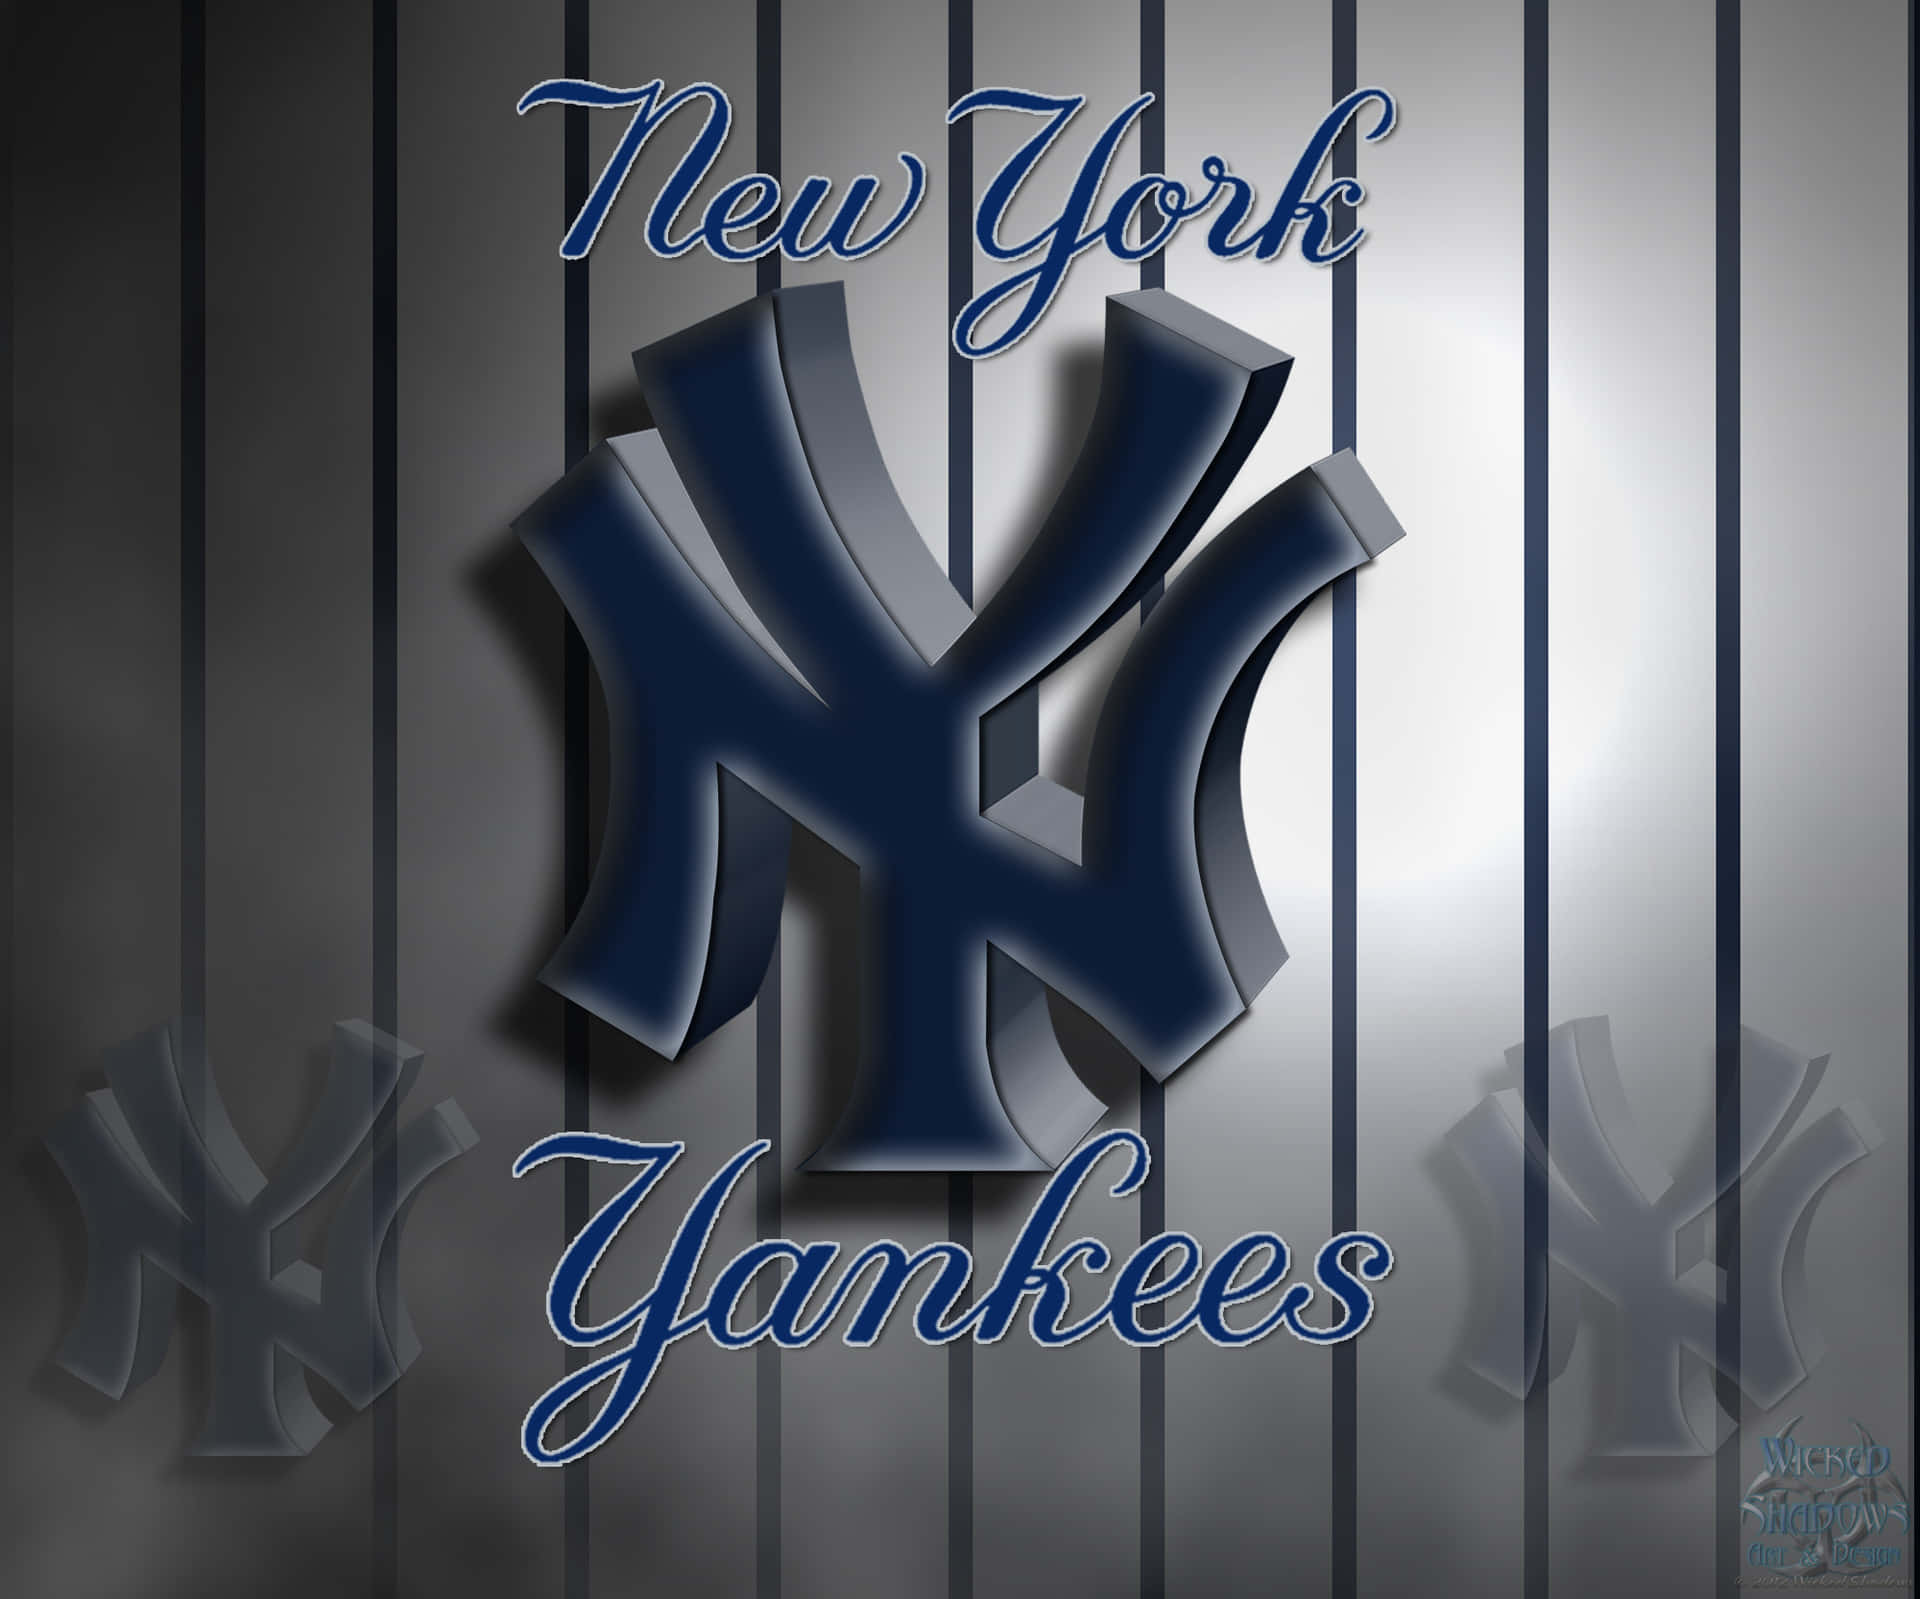 New York Yankees gear up for another winning season Wallpaper